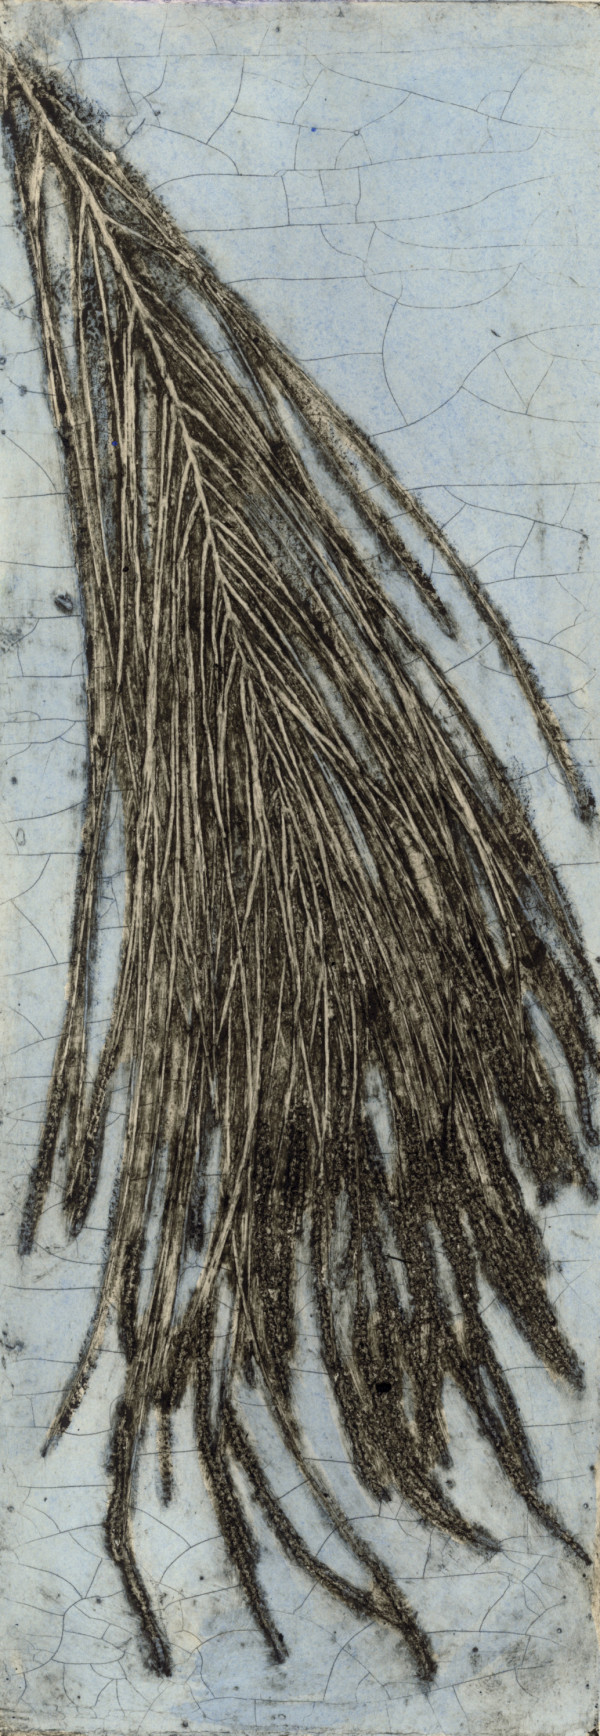 Casuarina with Male Flowers 2 3/6 3 by Jacky Lowry